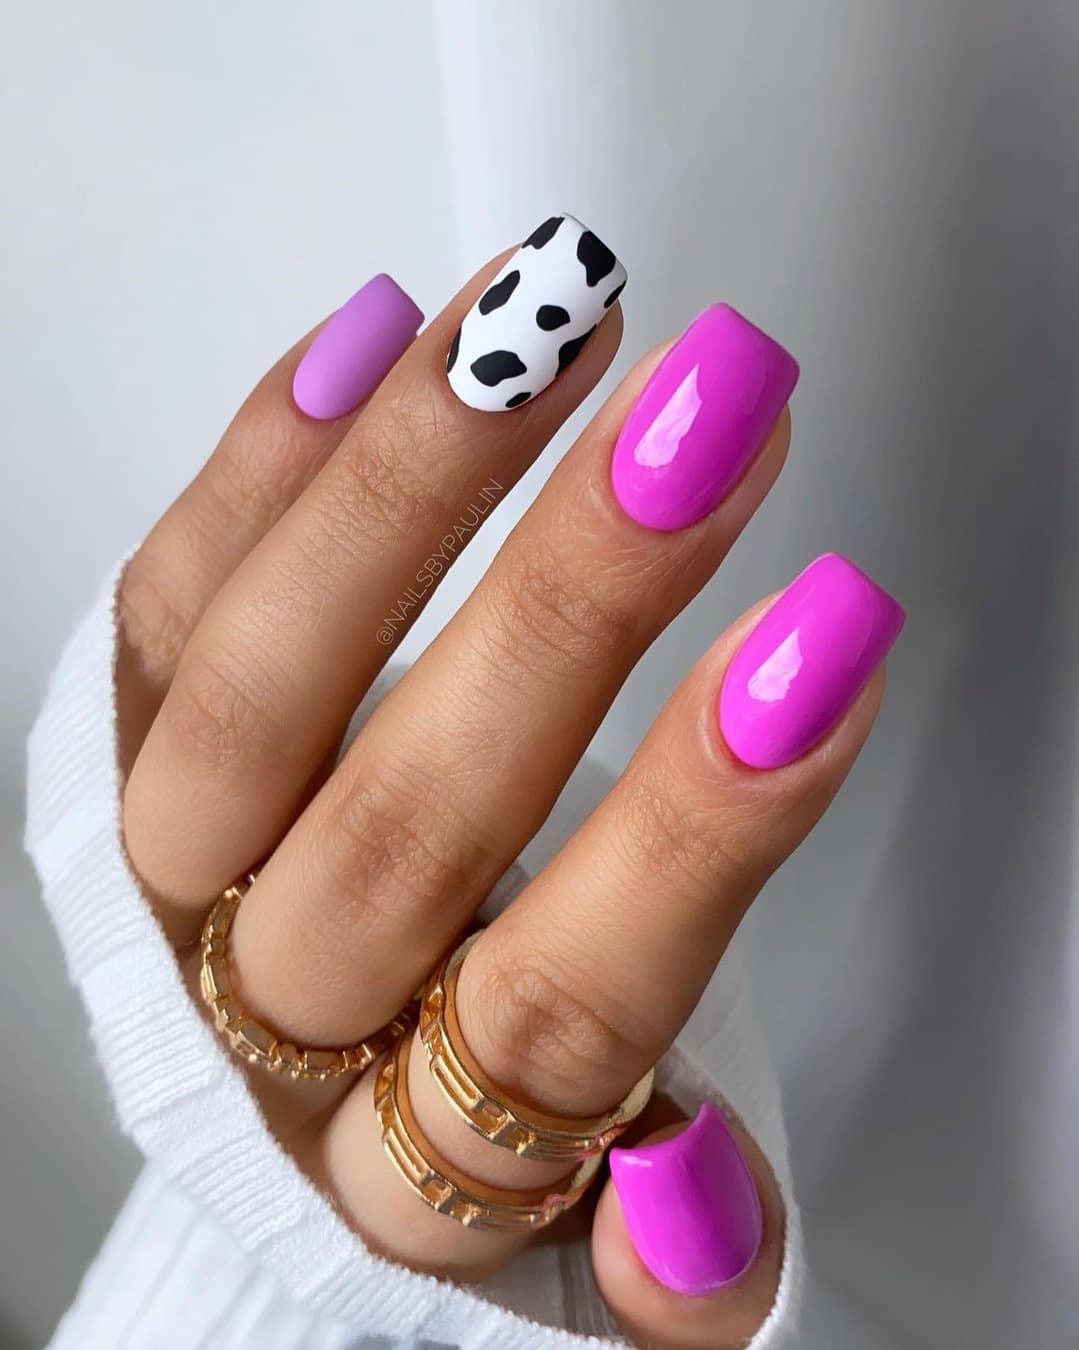 25 Trending Summer Nail Colors And Designs For 2021 images 10